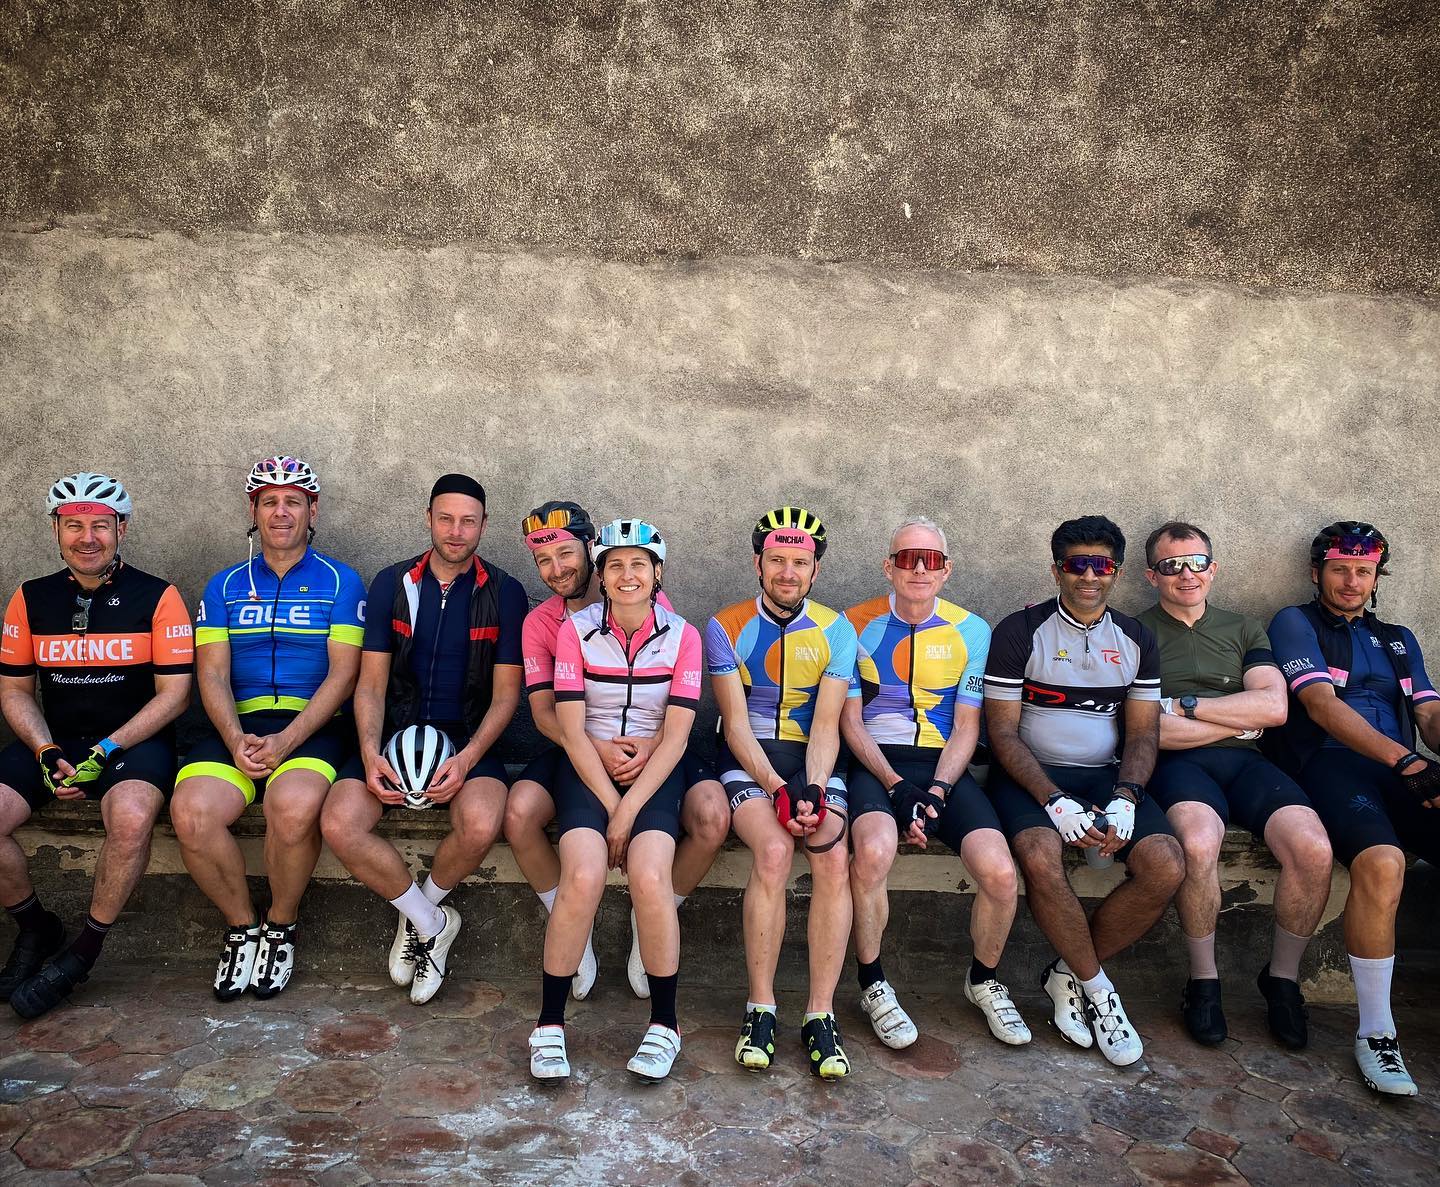 Visiting @palazzobiscari and all its hidden treasures! There is nothing like exploring the world on our bikes. Cycling is culture!

#sicilycycling #cyclinginsicily #scc #cyclingphotos #cycling #cyclingtravel #sicilycyclingclub #peloton #pelotonmagazine #cyclingtours #sicilianlesson #gravelroad